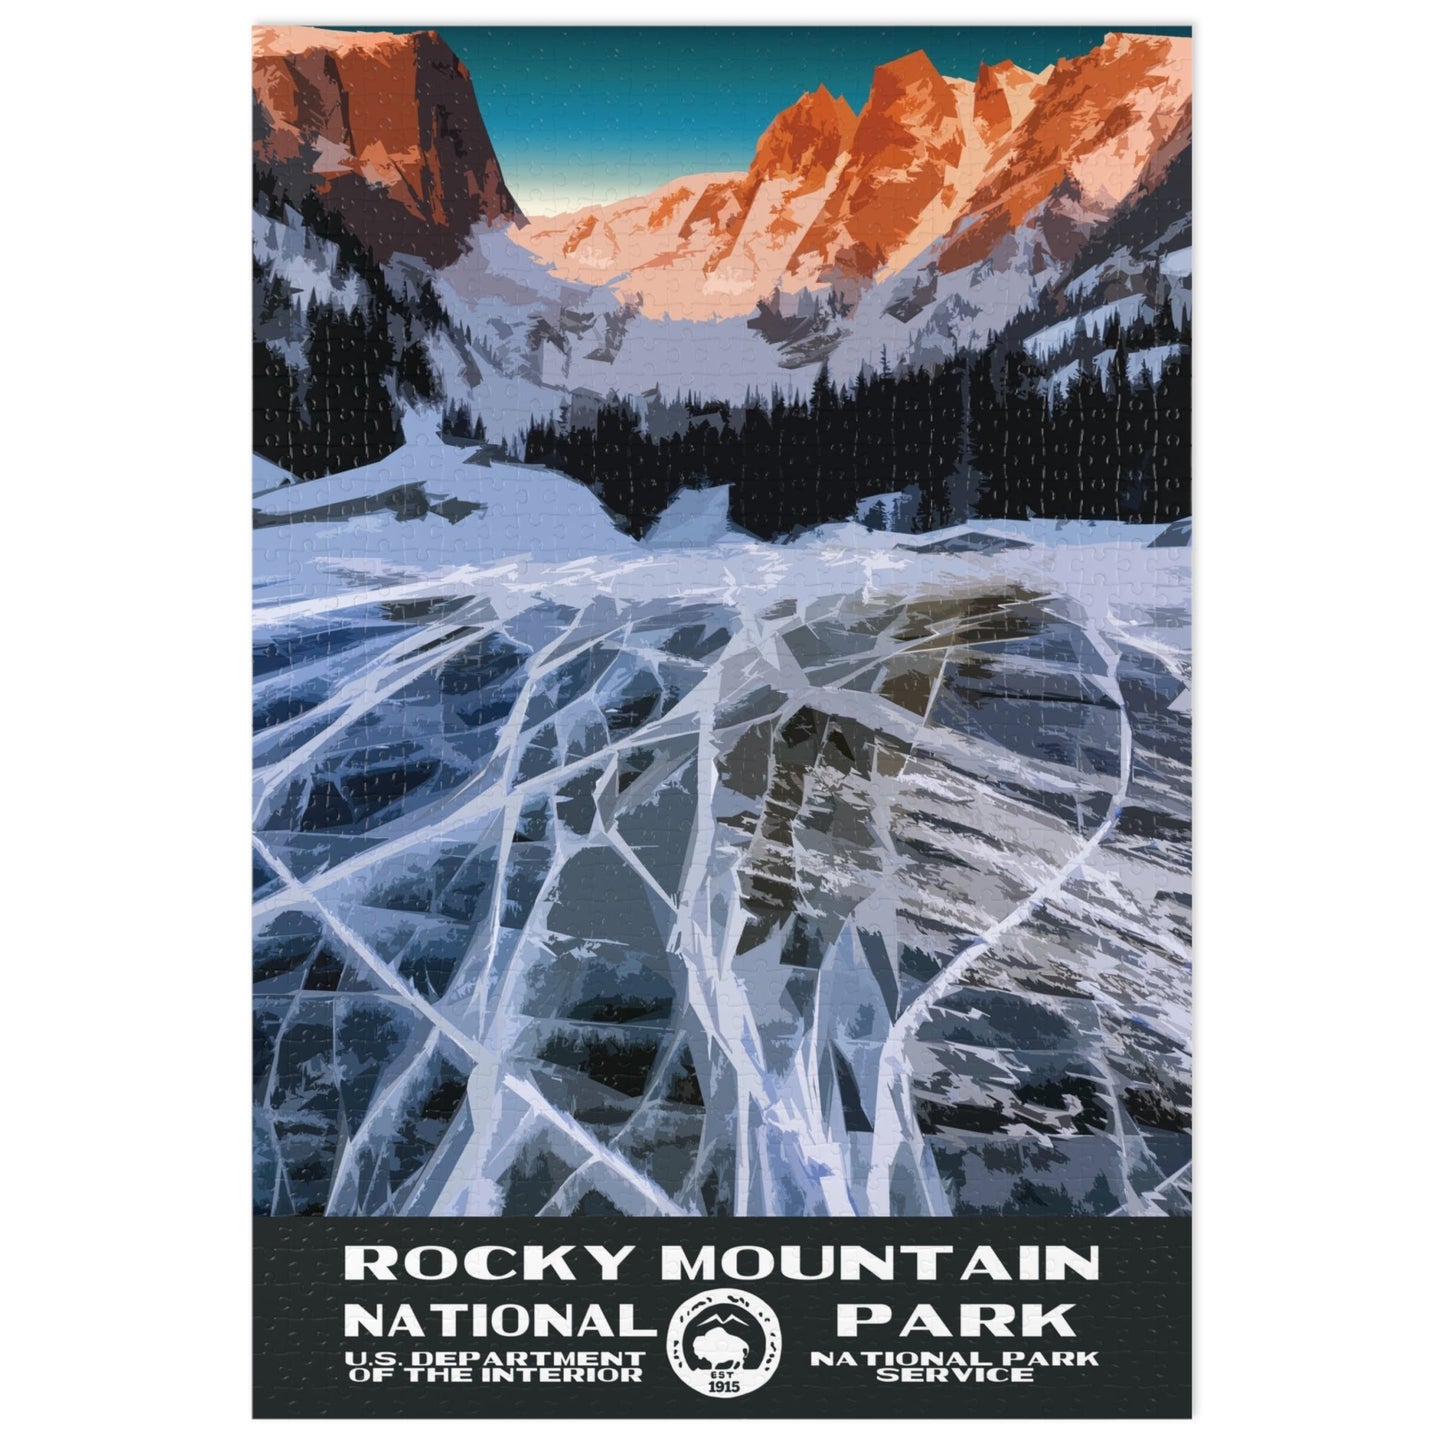 Rocky Mountain National Park Jigsaw Puzzle - 1000 Pieces